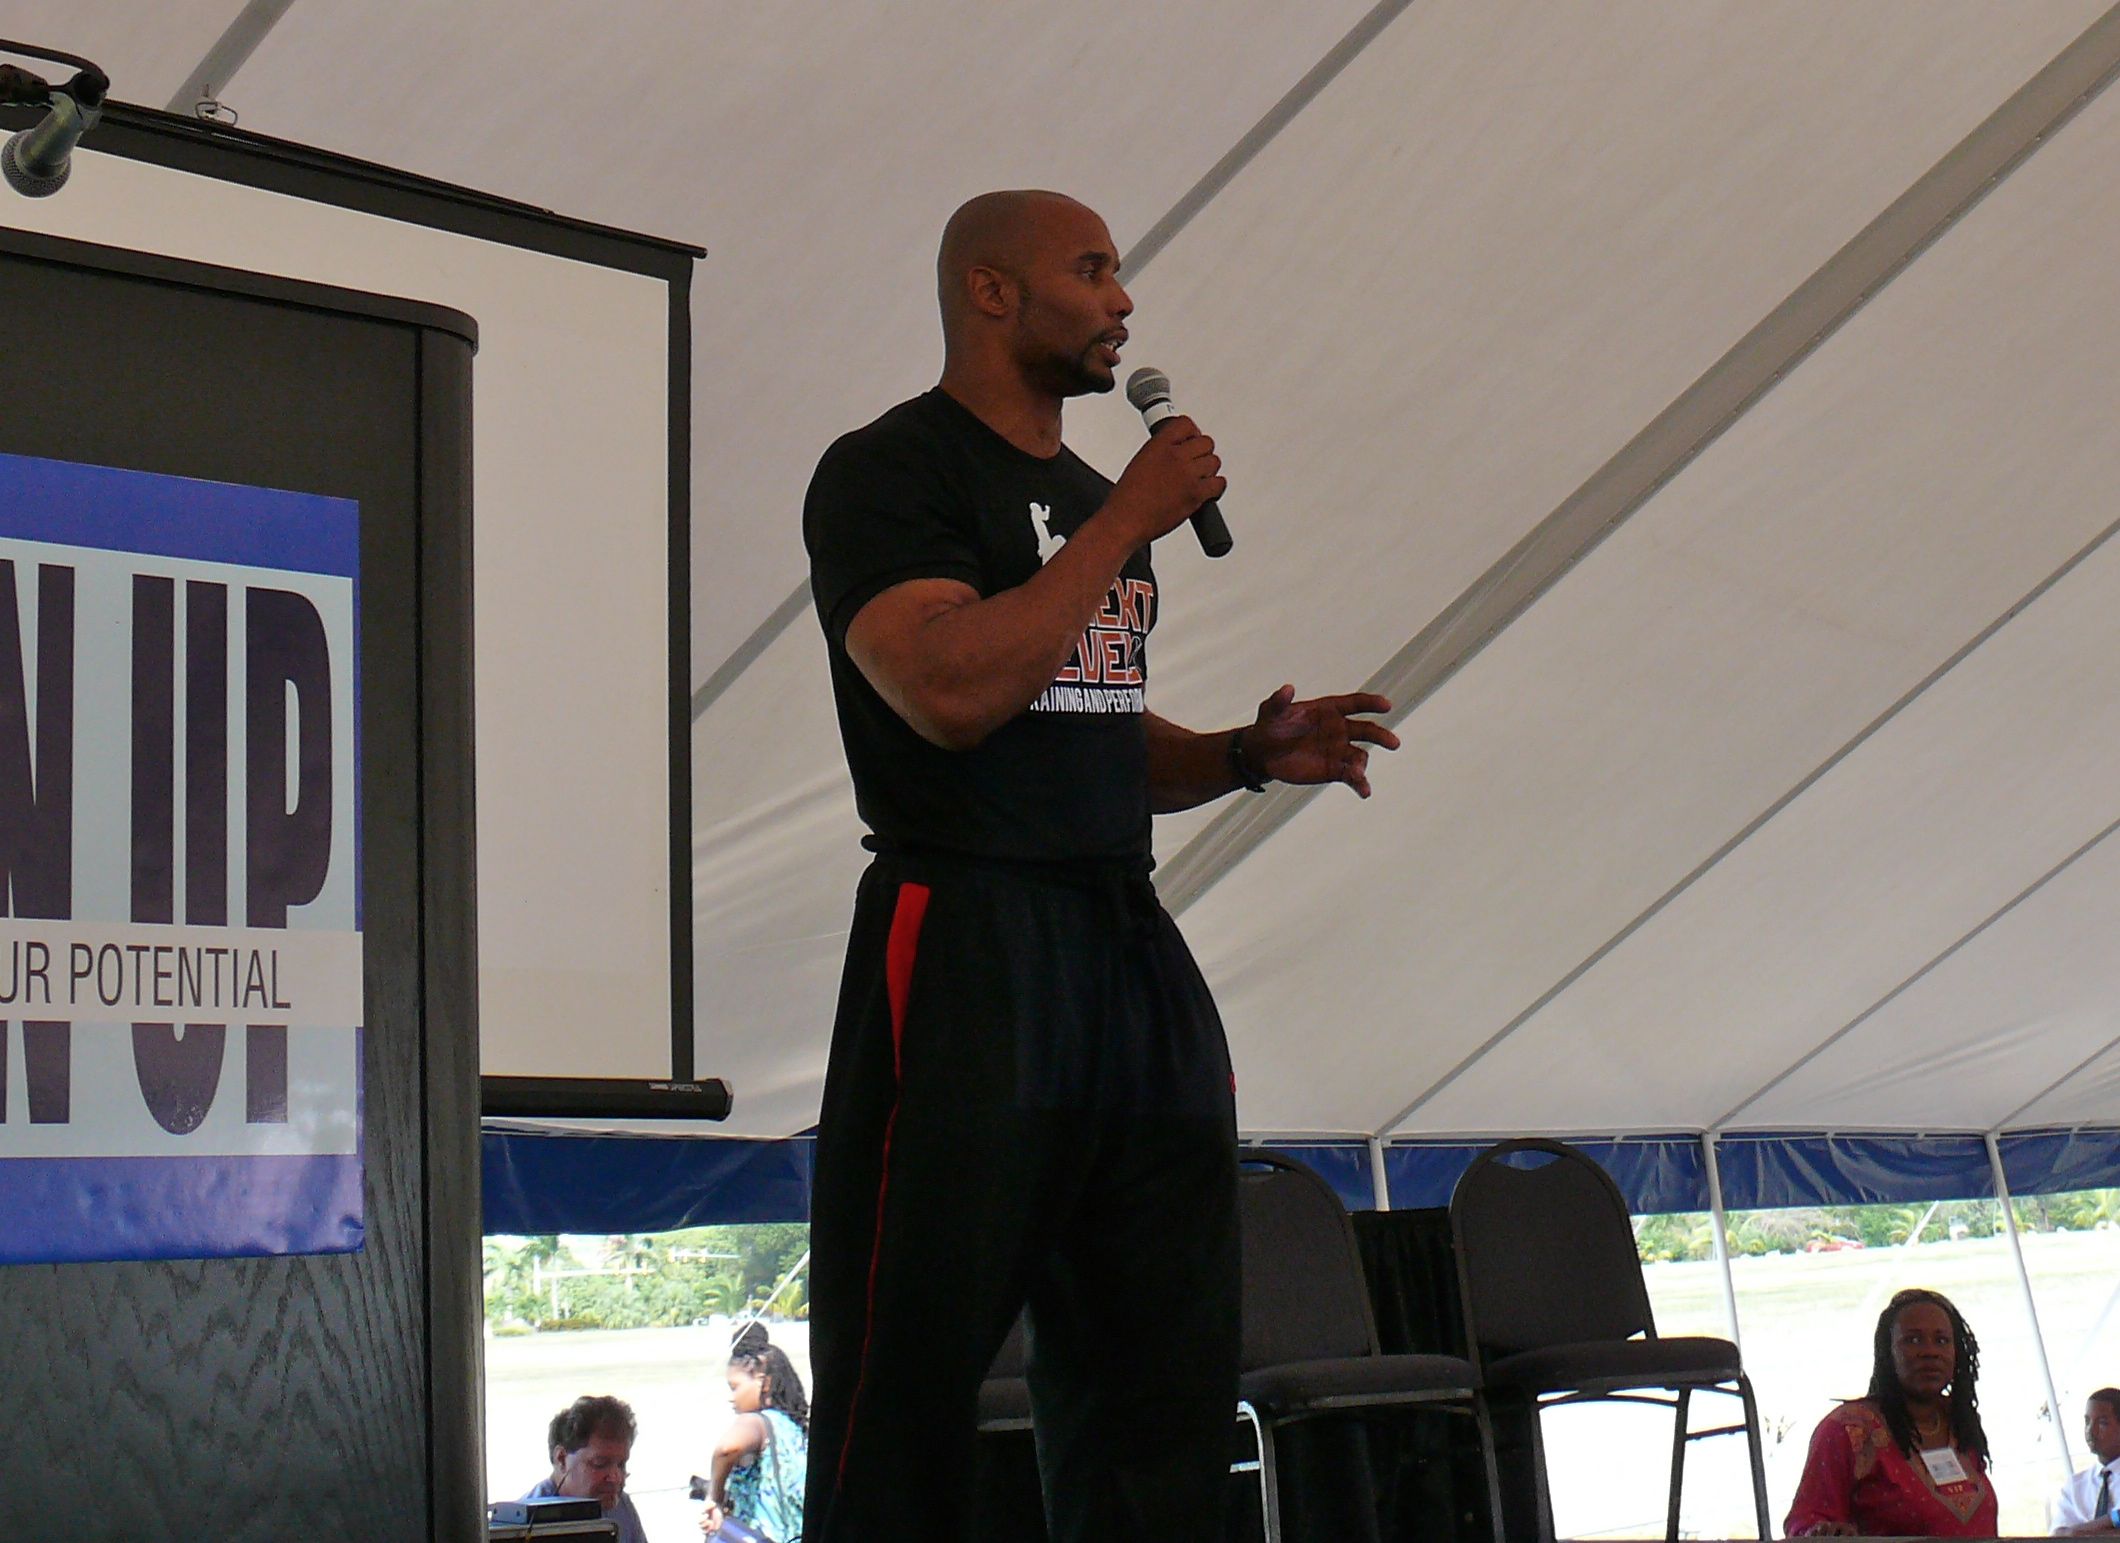 Ex-NFL Defensive Back Donovin Darius spoke Thursday about the challenges of growing up poor.